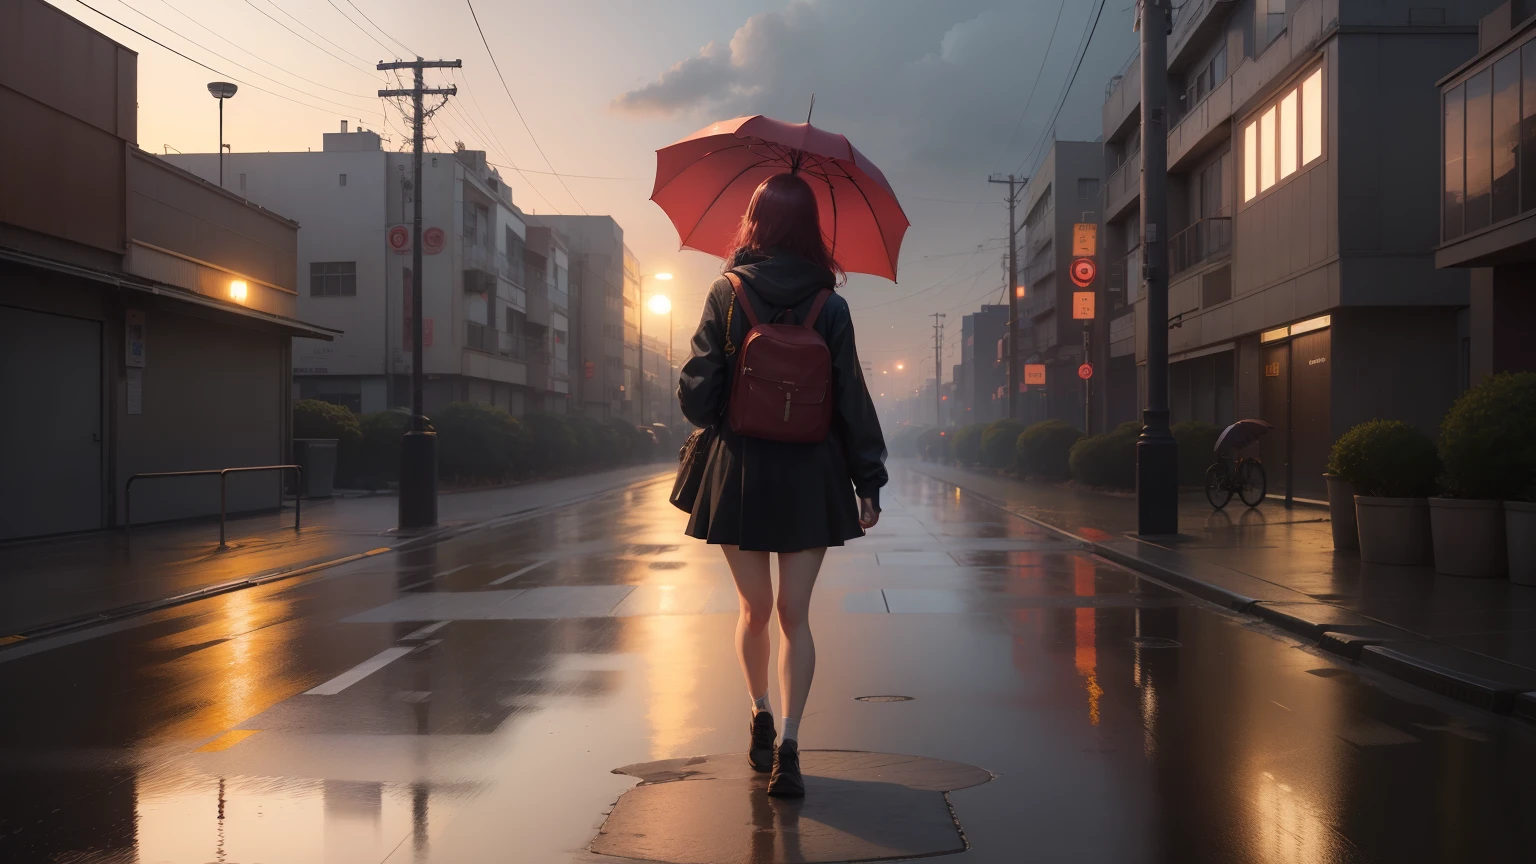 There is a young woman walking home with an umbrella, woman in her 20s, light rain, tokyo anime scene, style of alena aenami, calm sunset, beautiful anime scene, anime atmosphere, anime art wallpaper 4k, anime art wallpaper 8k